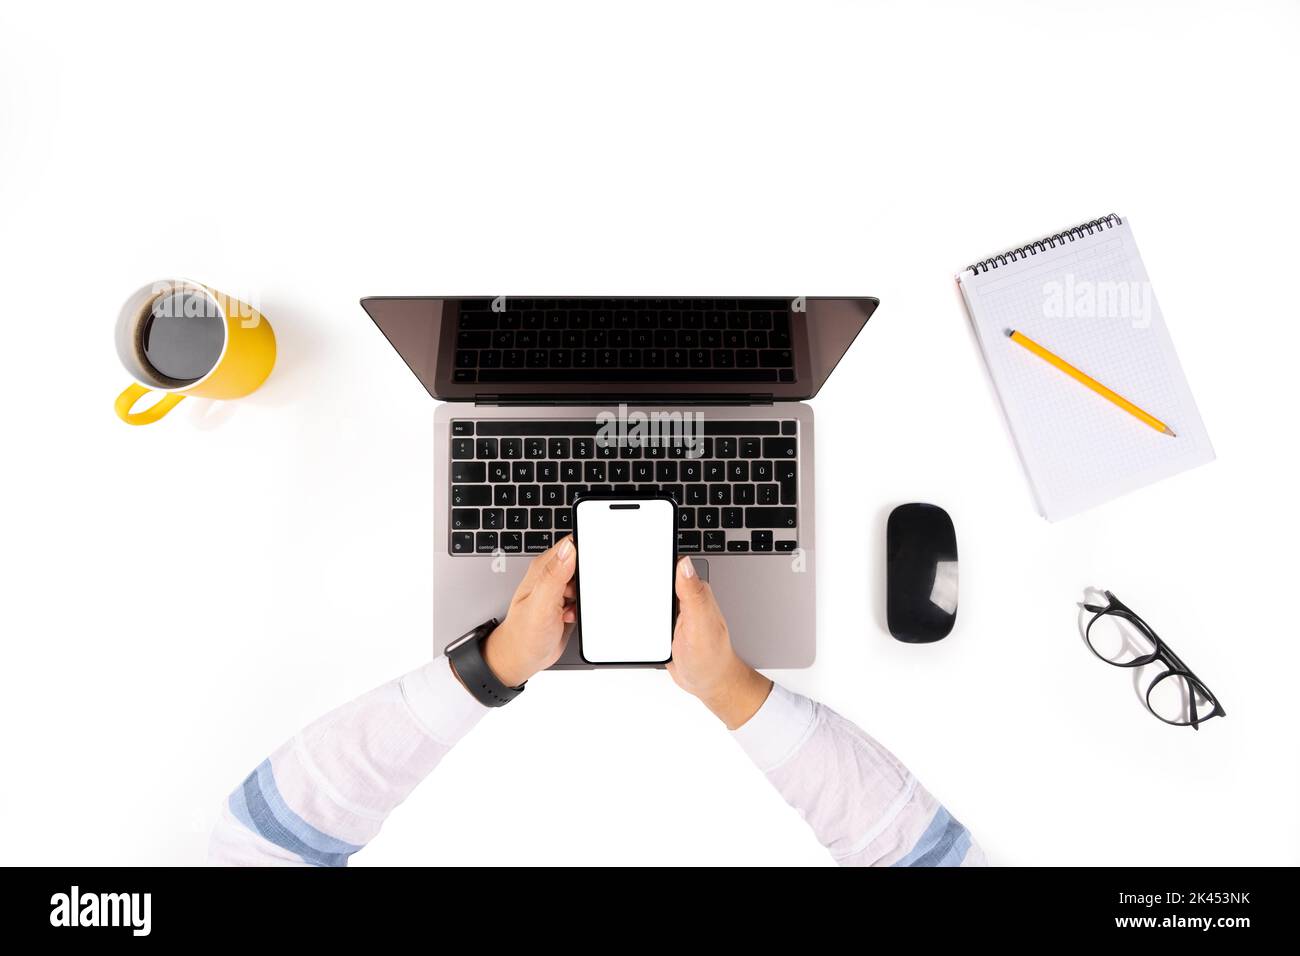 Woman working on laptop, top view photo of woman working on laptop. using smartphone for mock up. White blank screen. Business desk setup, mouse. Stock Photo